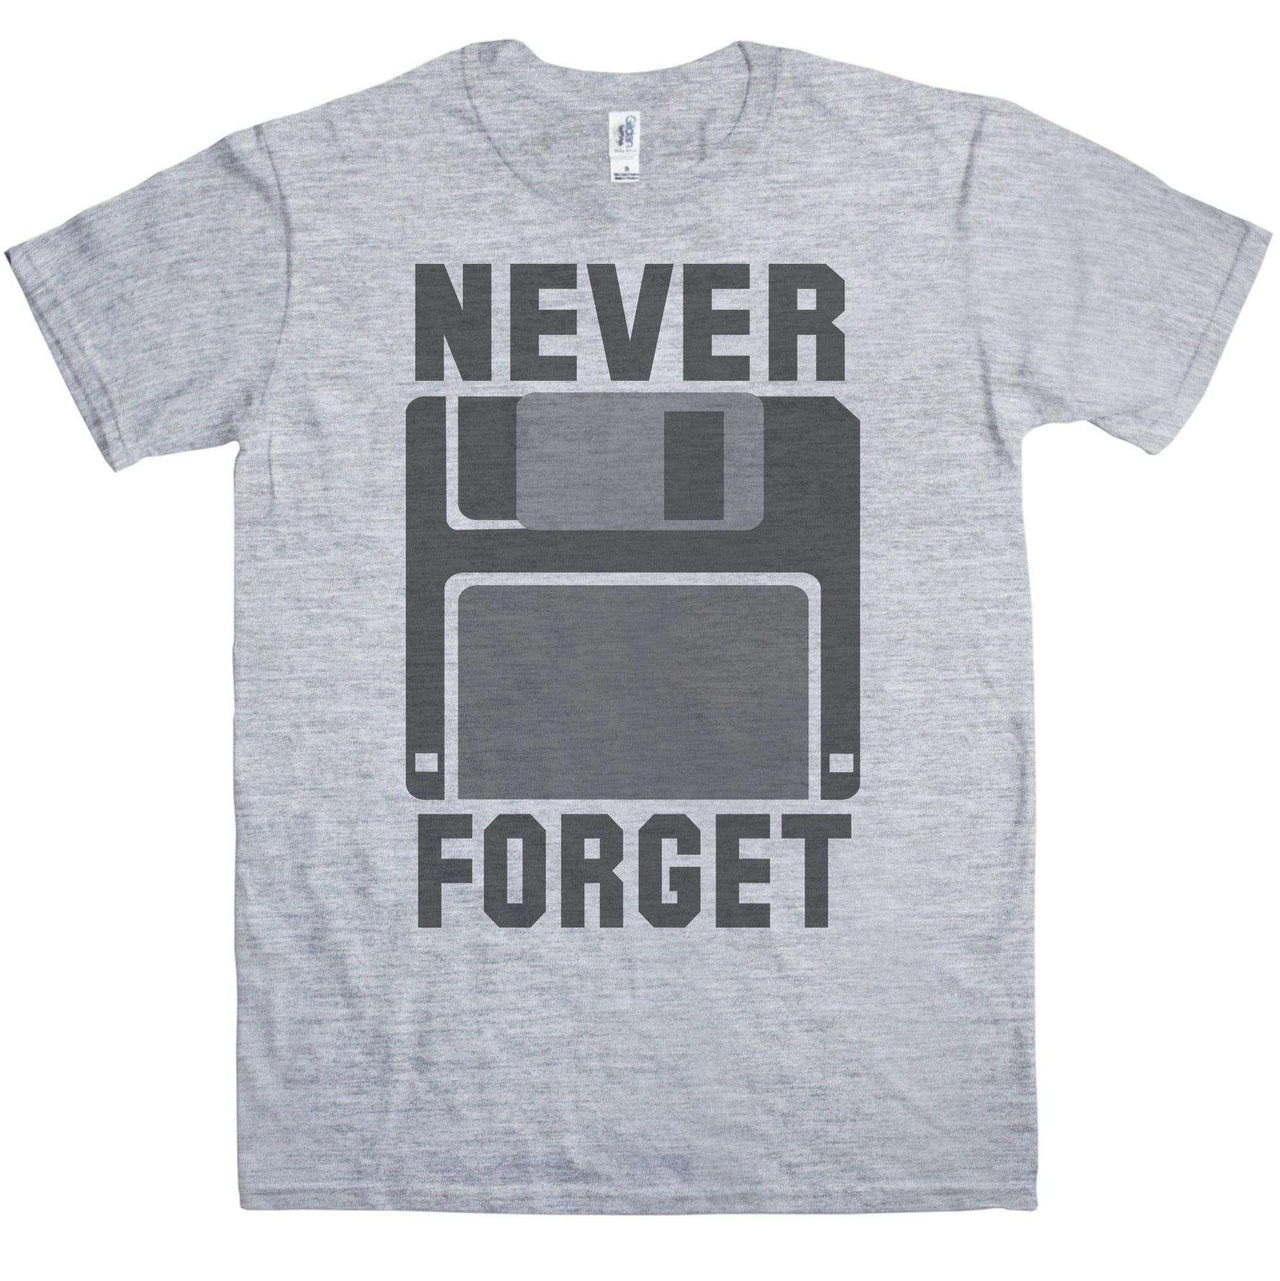 Never Forget Unisex T-Shirt For Men And Women, Inspired By Silicon Valley 8Ball